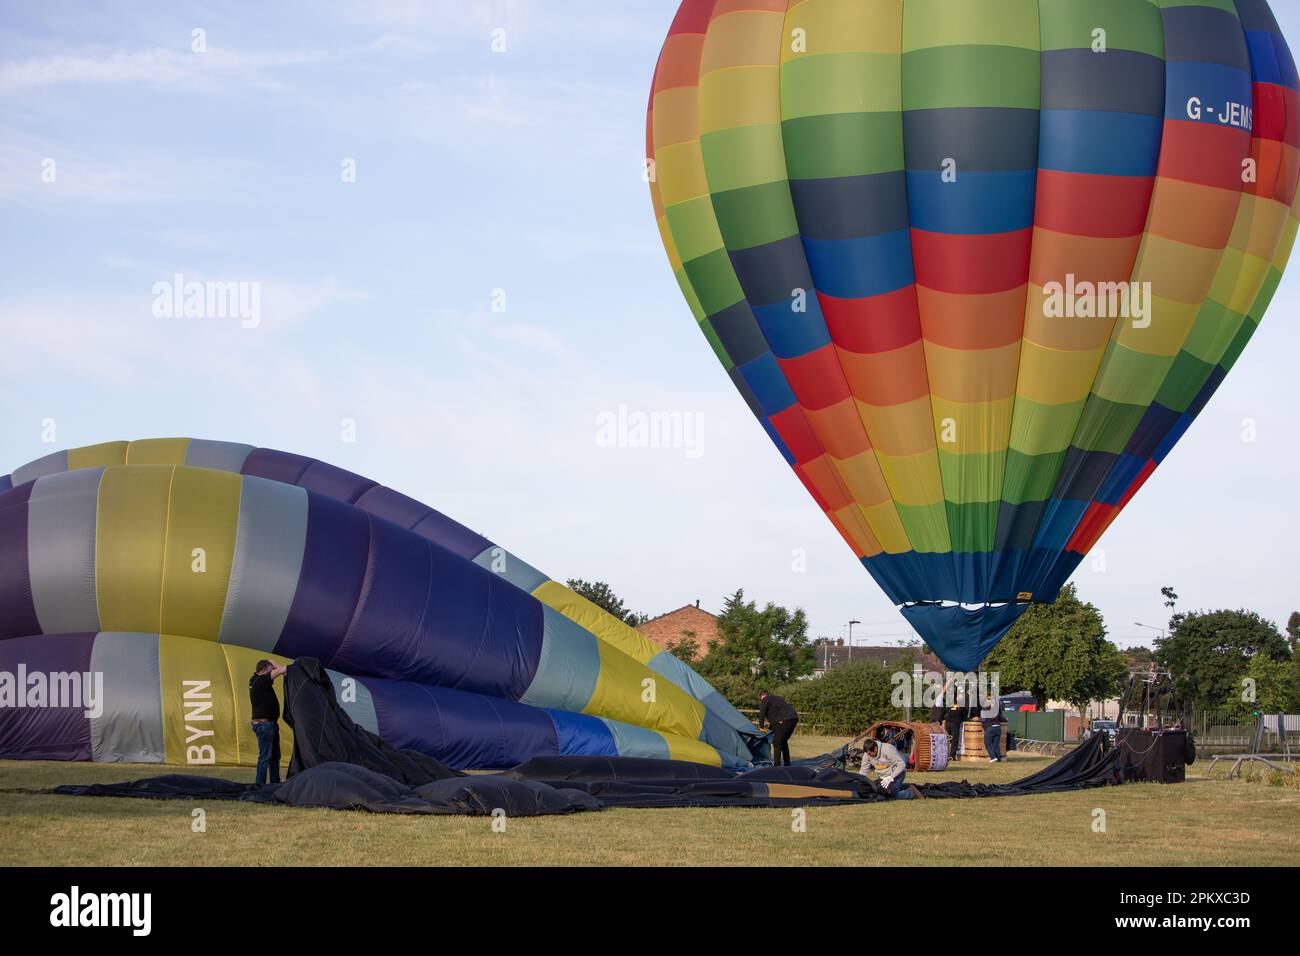 People work to deflate, roll up and pack hot air balloons which have just landed Stock Photo